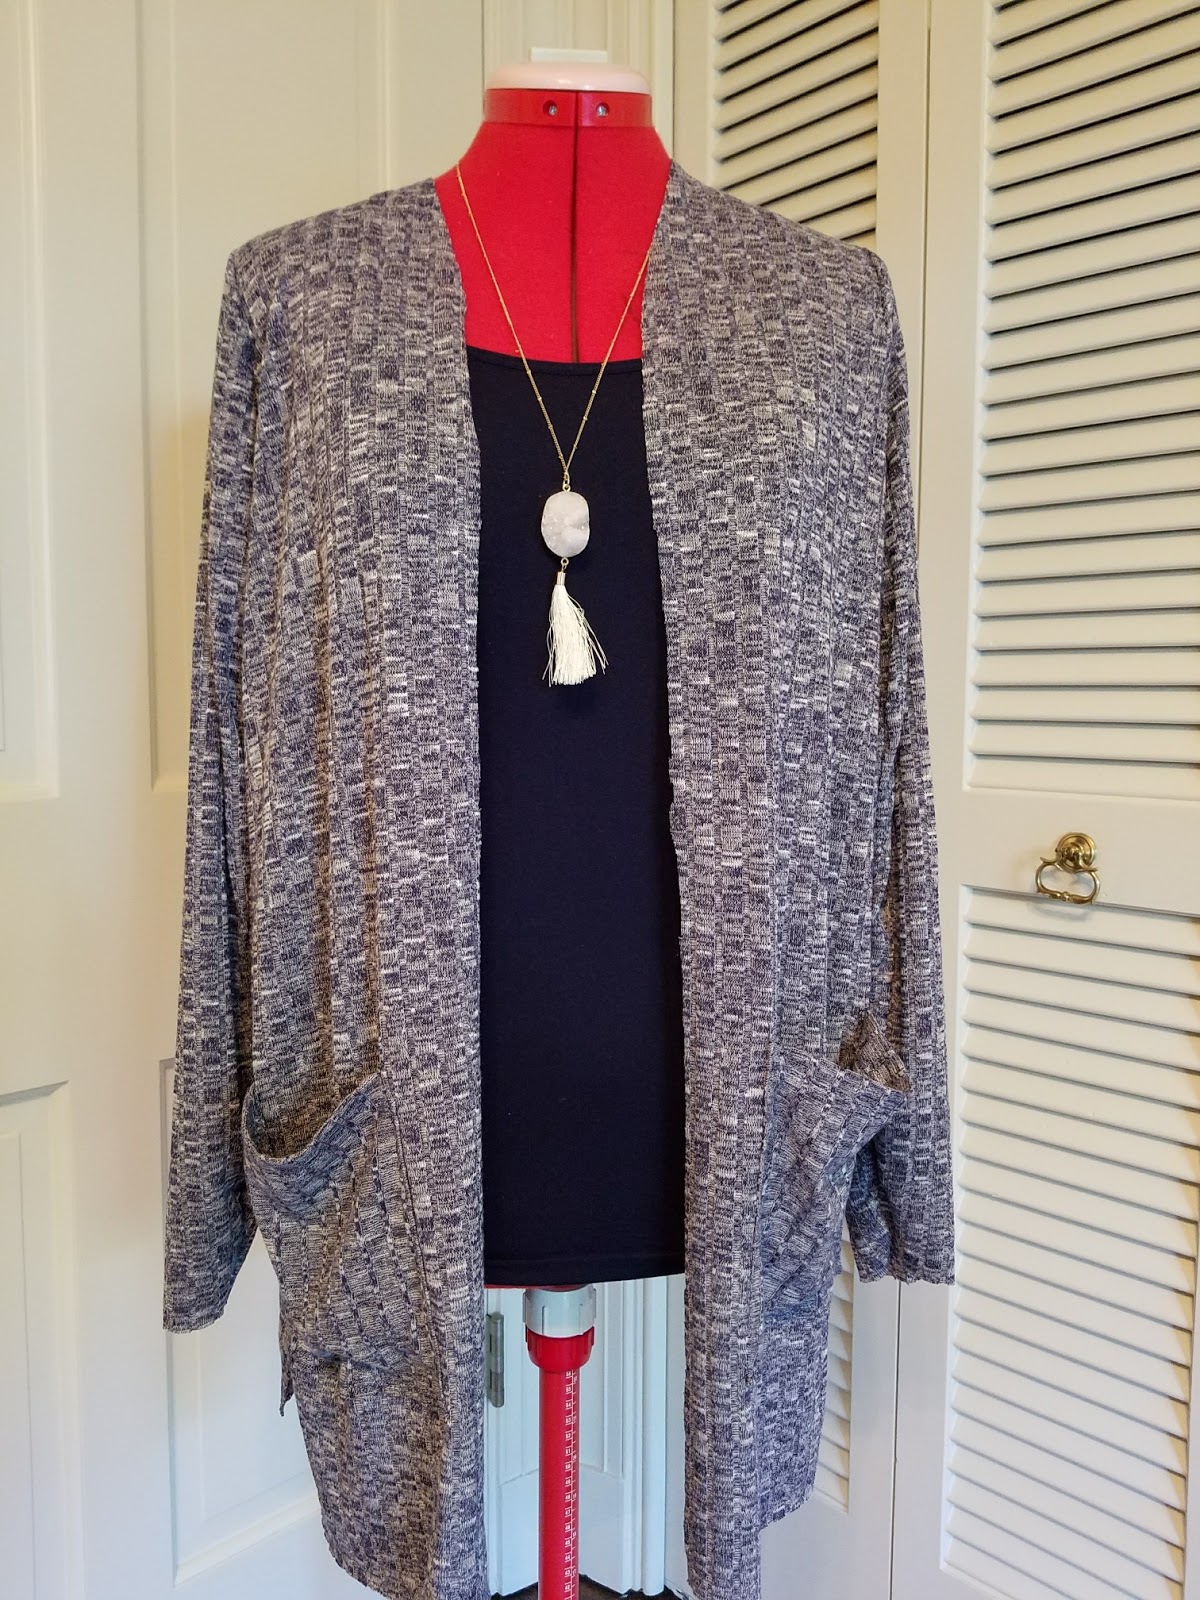 Claire Cardigan Sew Along Day 3 – Seamingly Smitten